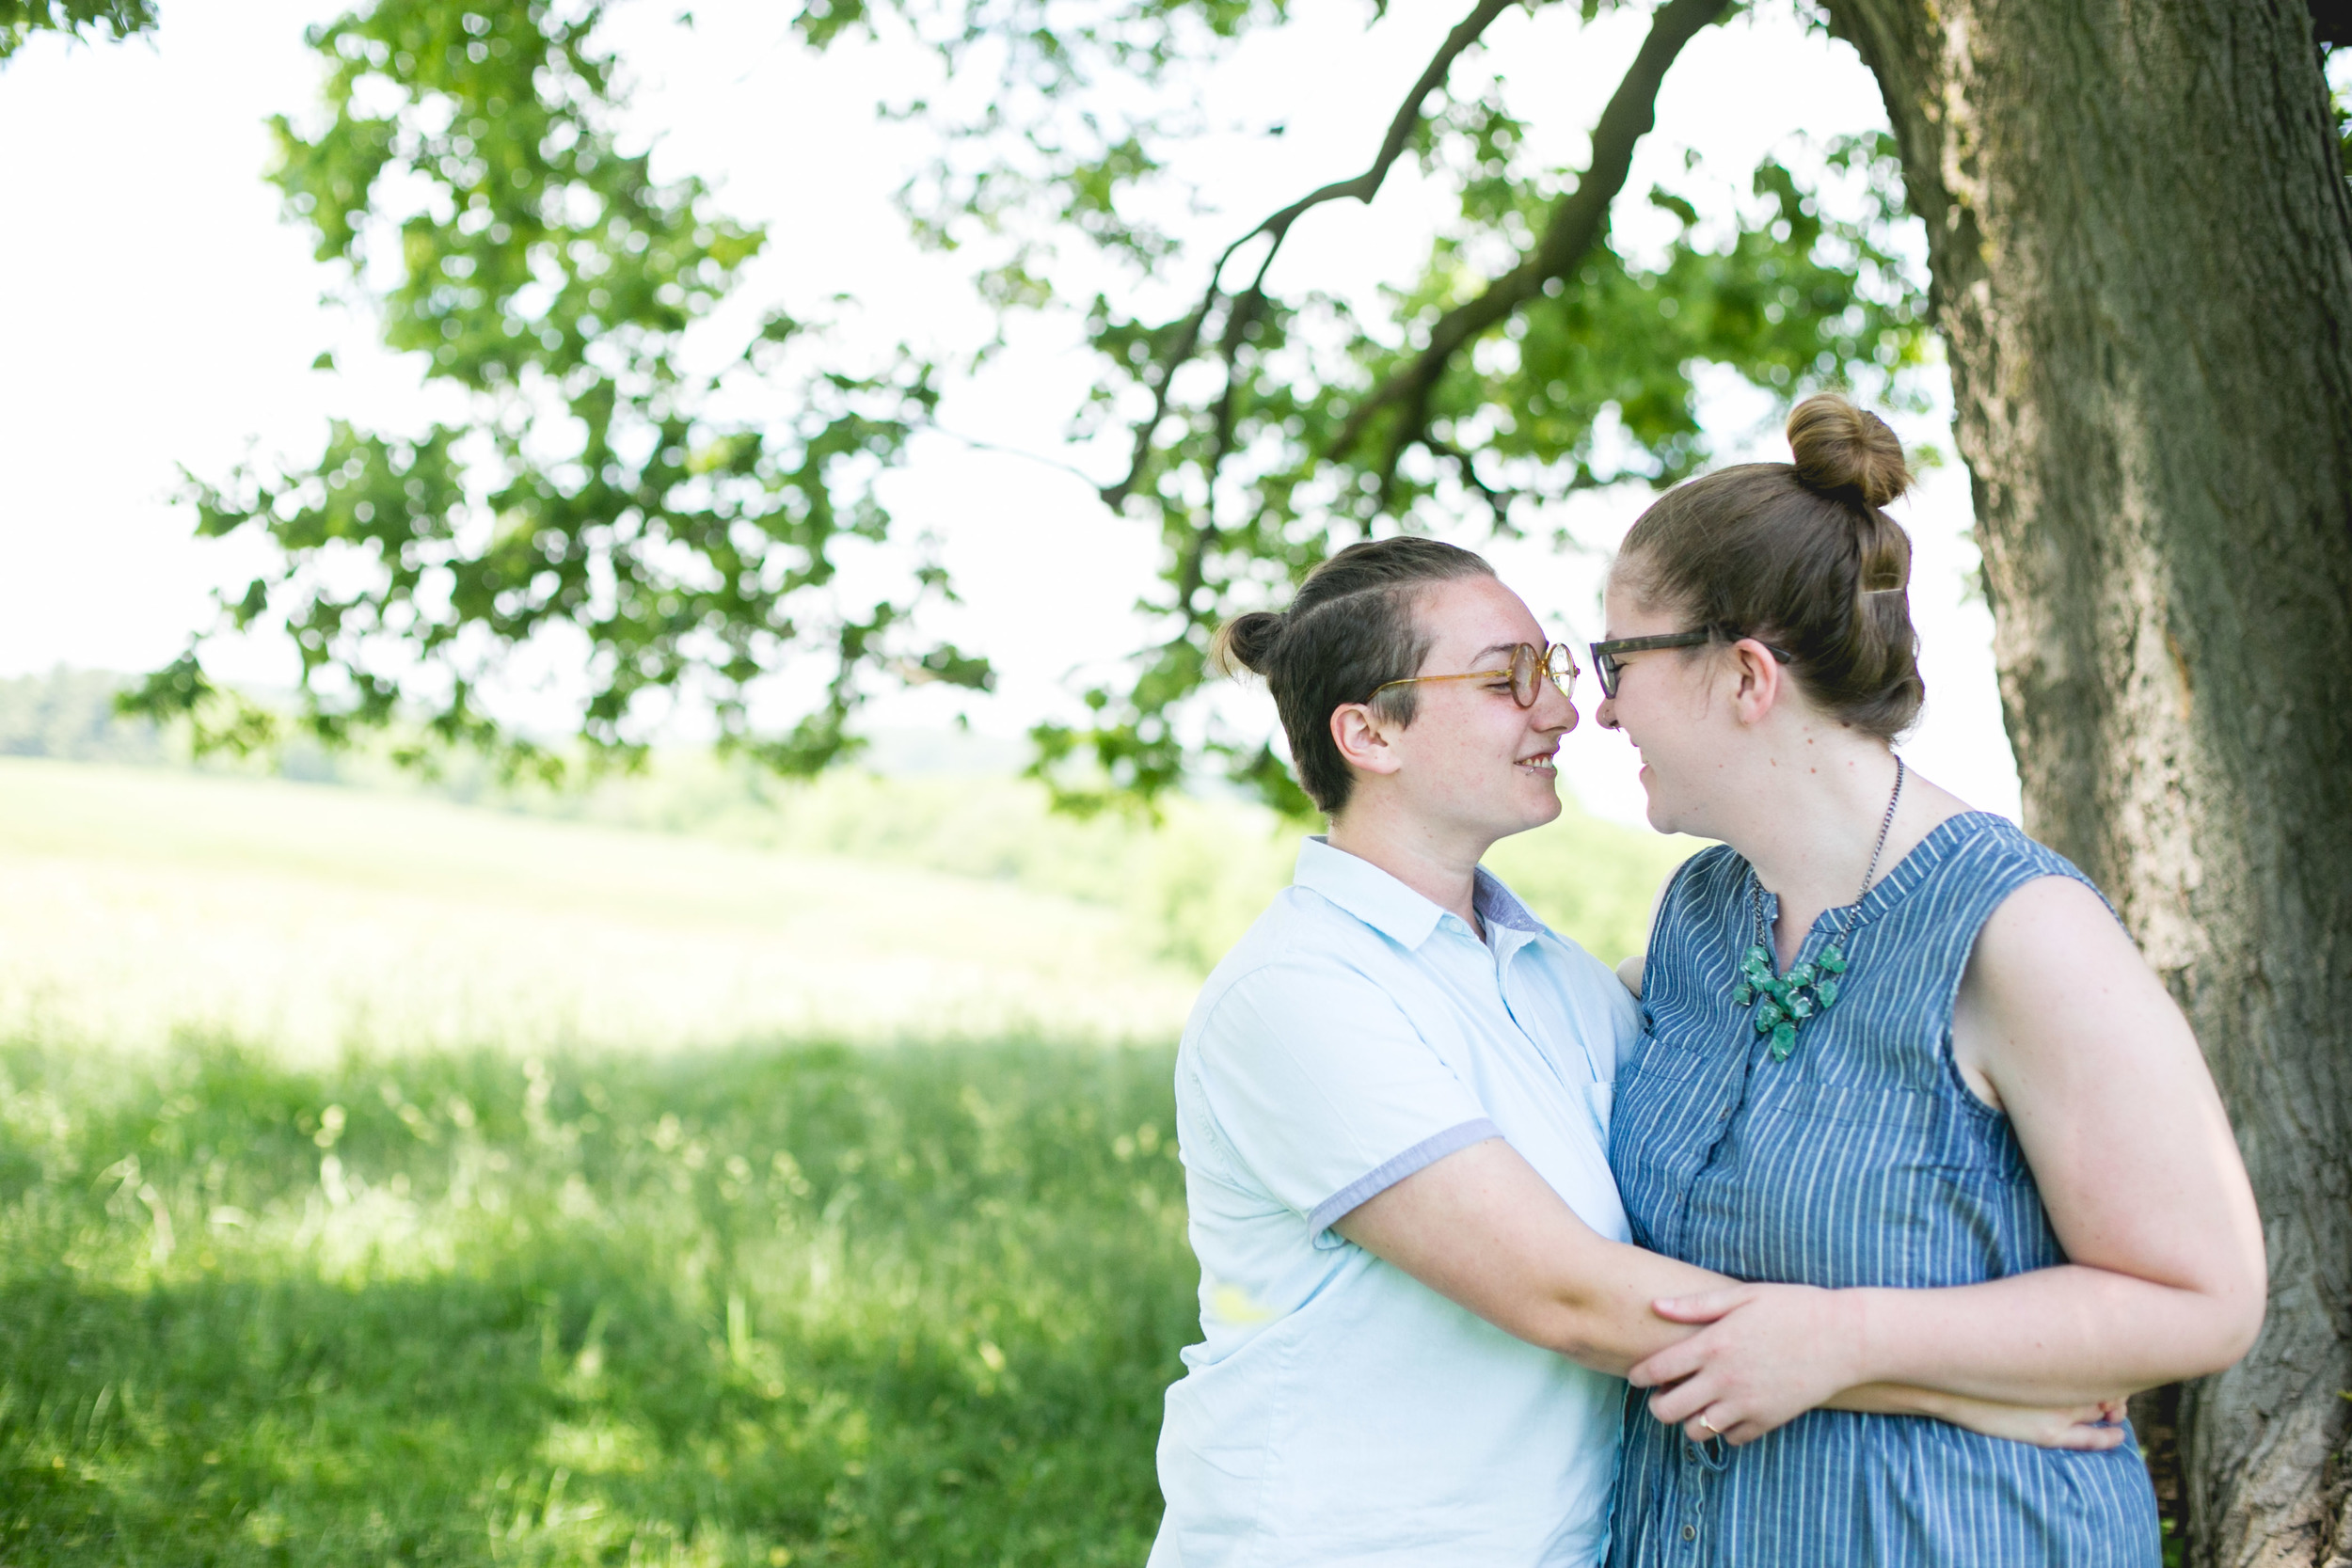  A spring Valley Forge State Park, King of Prussia Pa Queer Engagement session with Alex and Lee by Swiger Photography, Philadelphia's Lesbian Photographer 